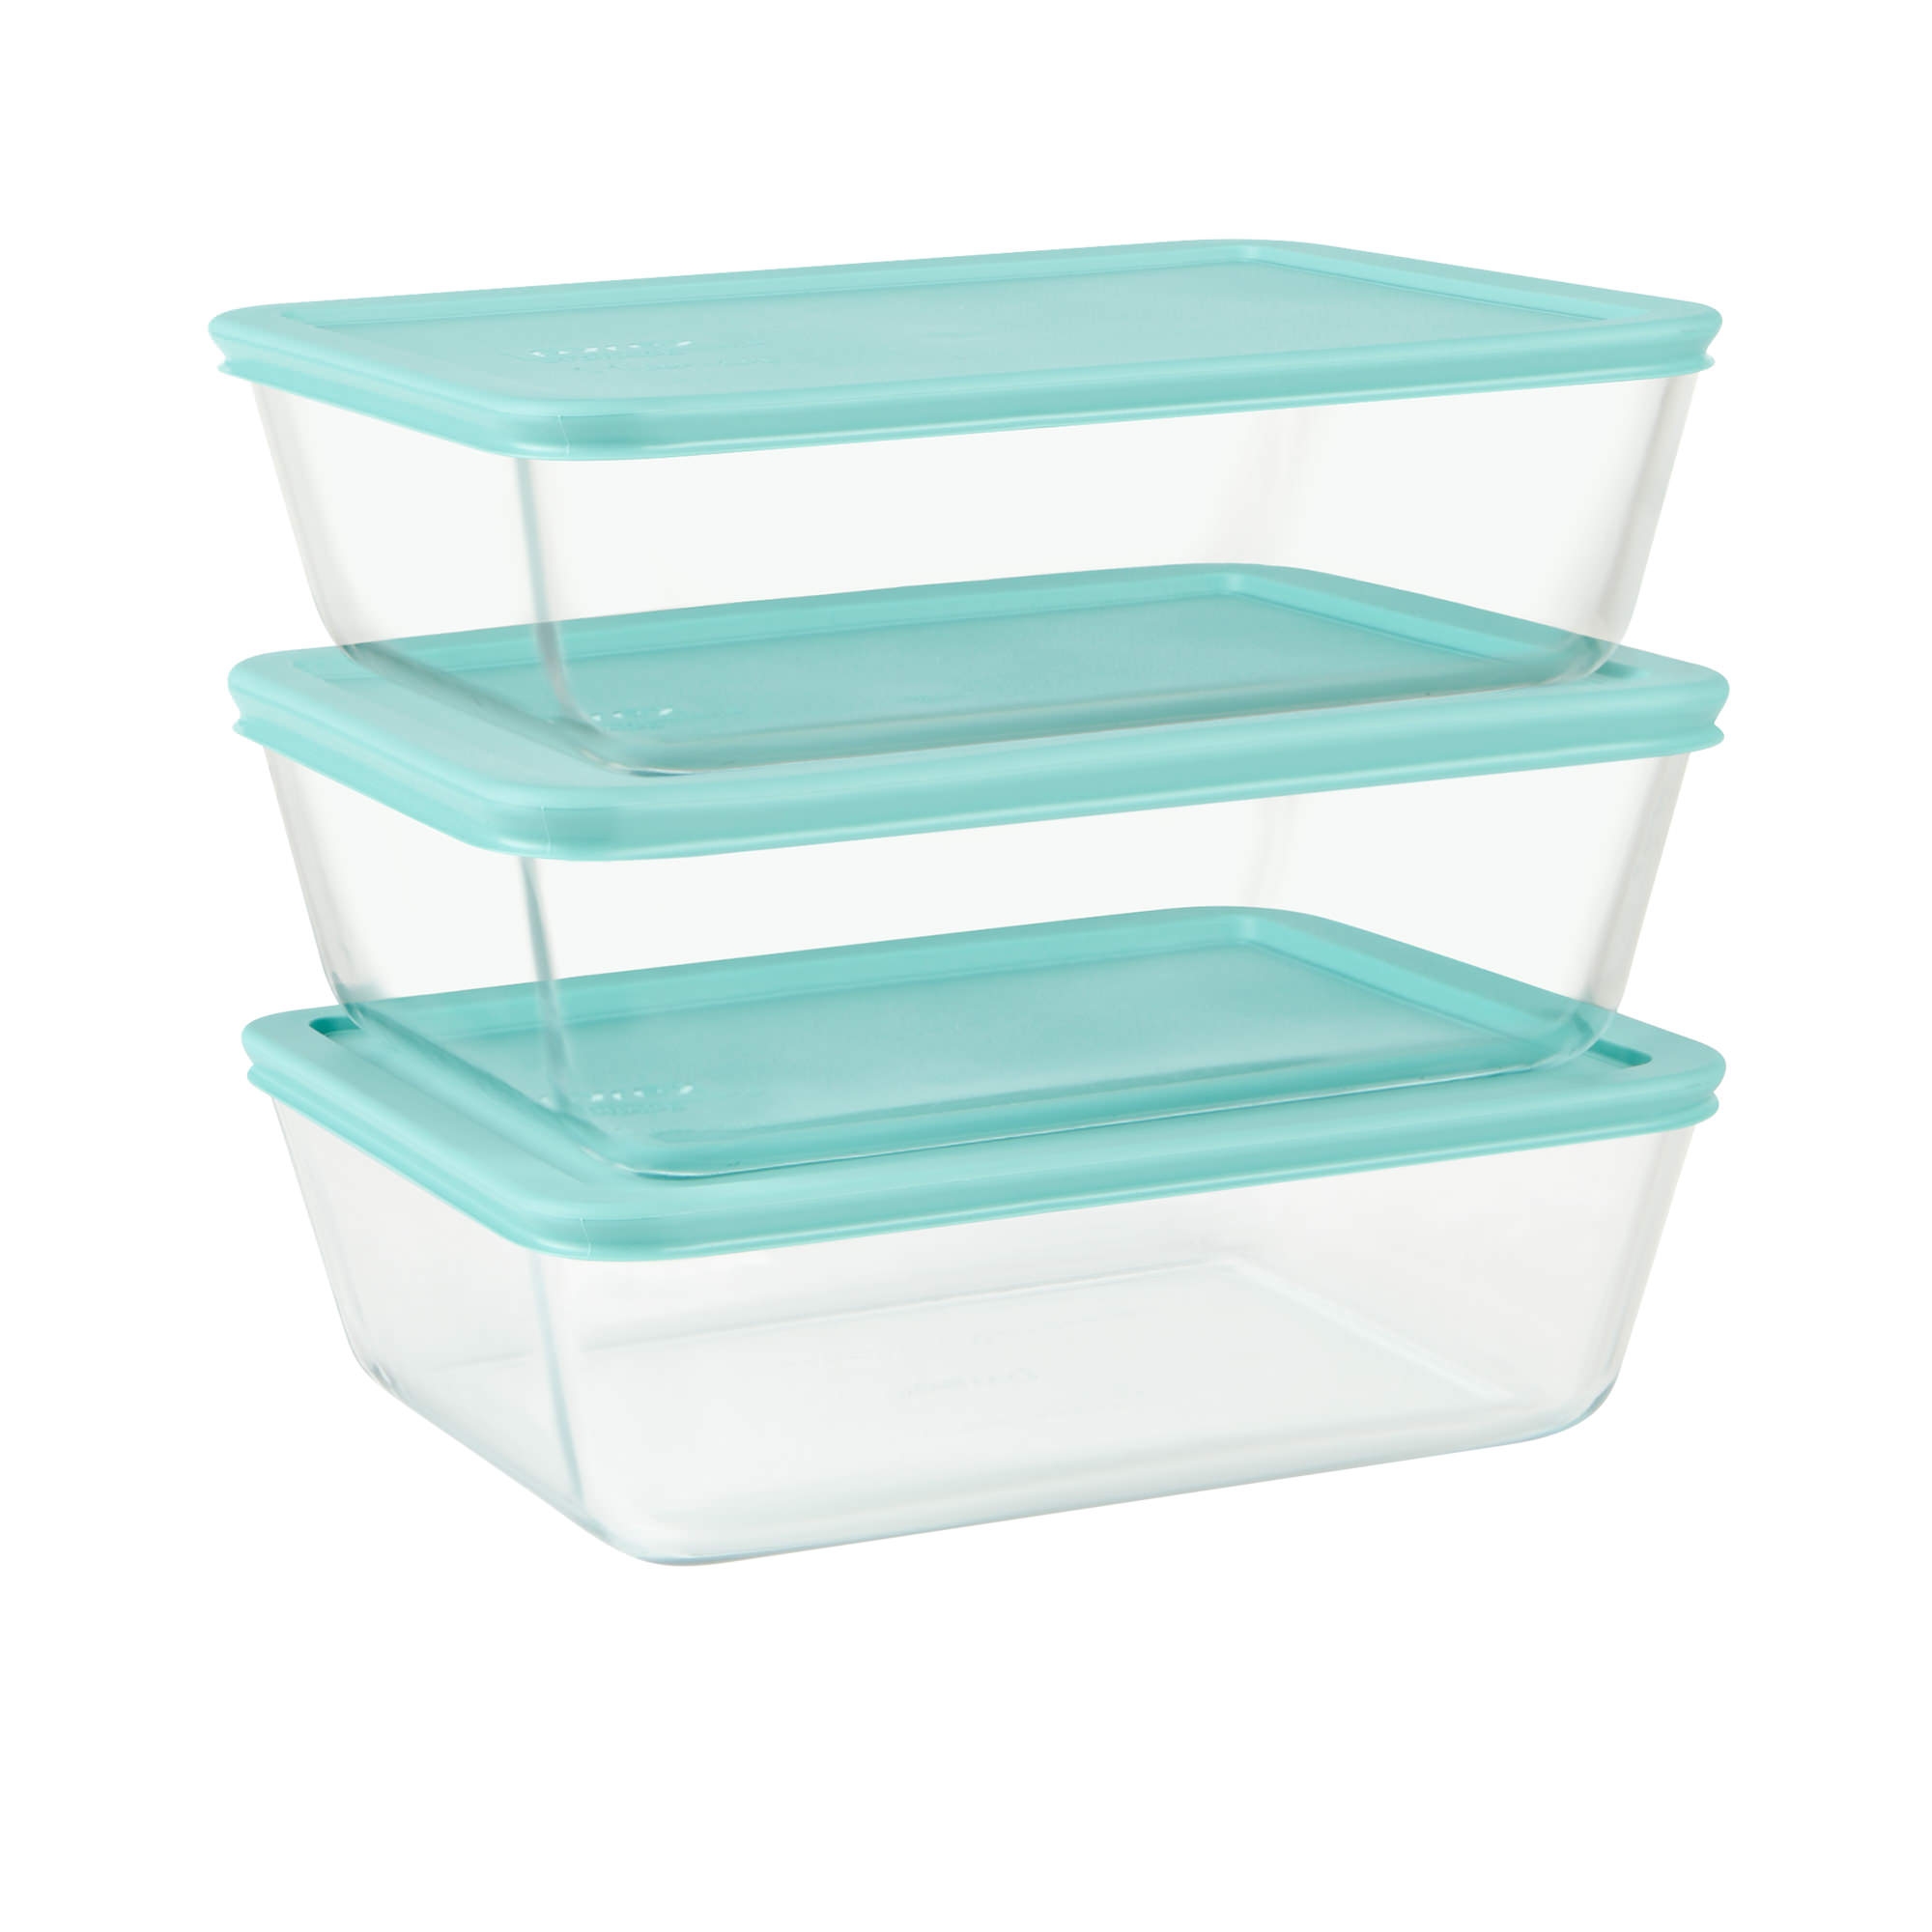 Pyrex Simply Store Rectangular Glass Meal Plan Container 2.6L Set of 3 Image 1